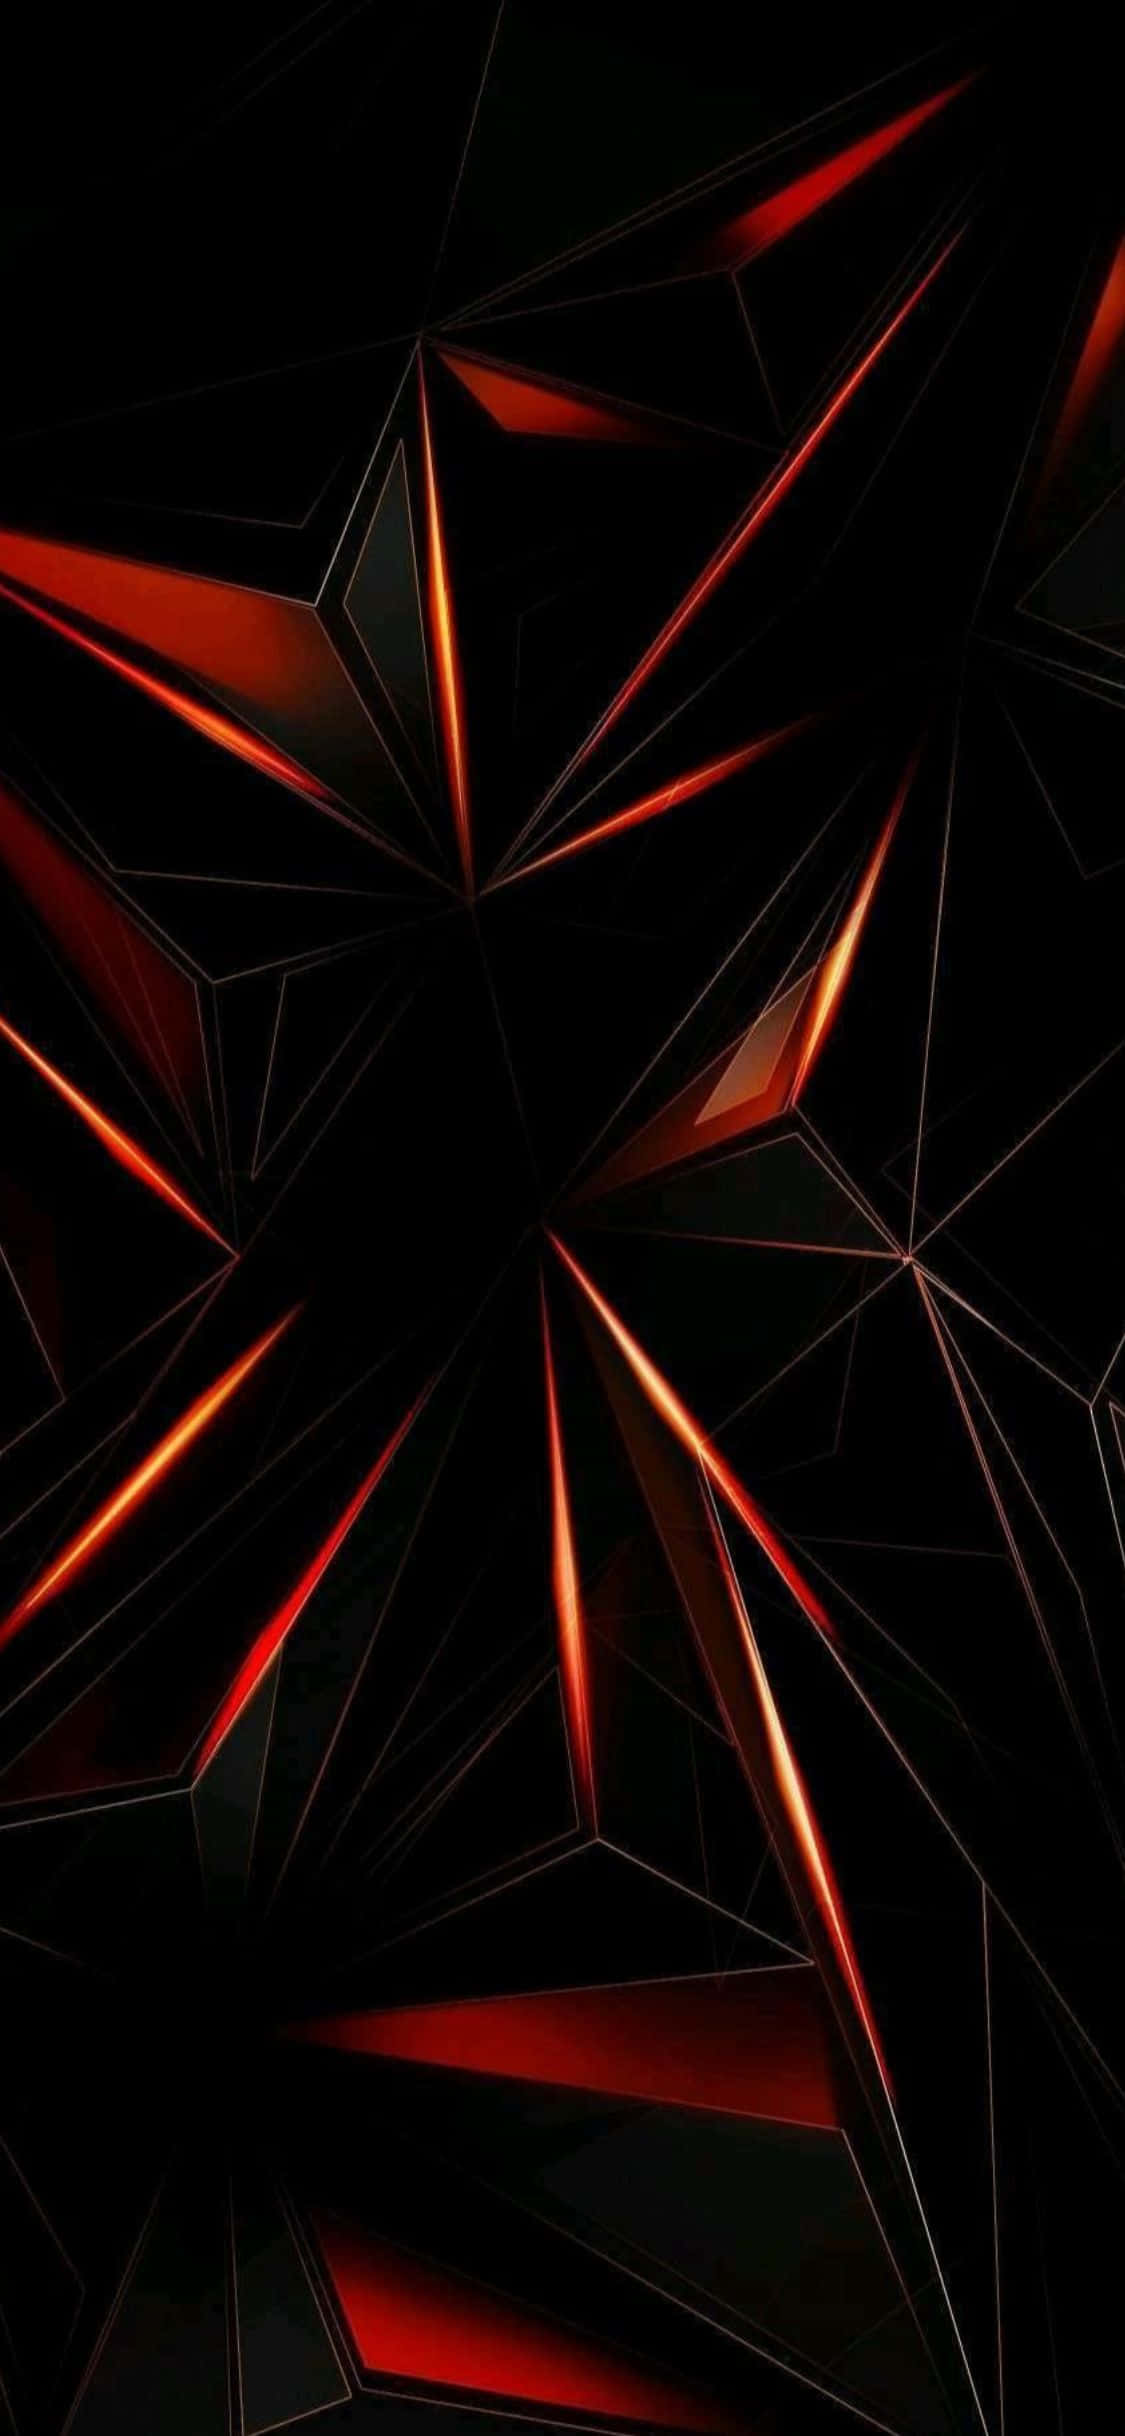 A Black Background With Red And Black Triangles